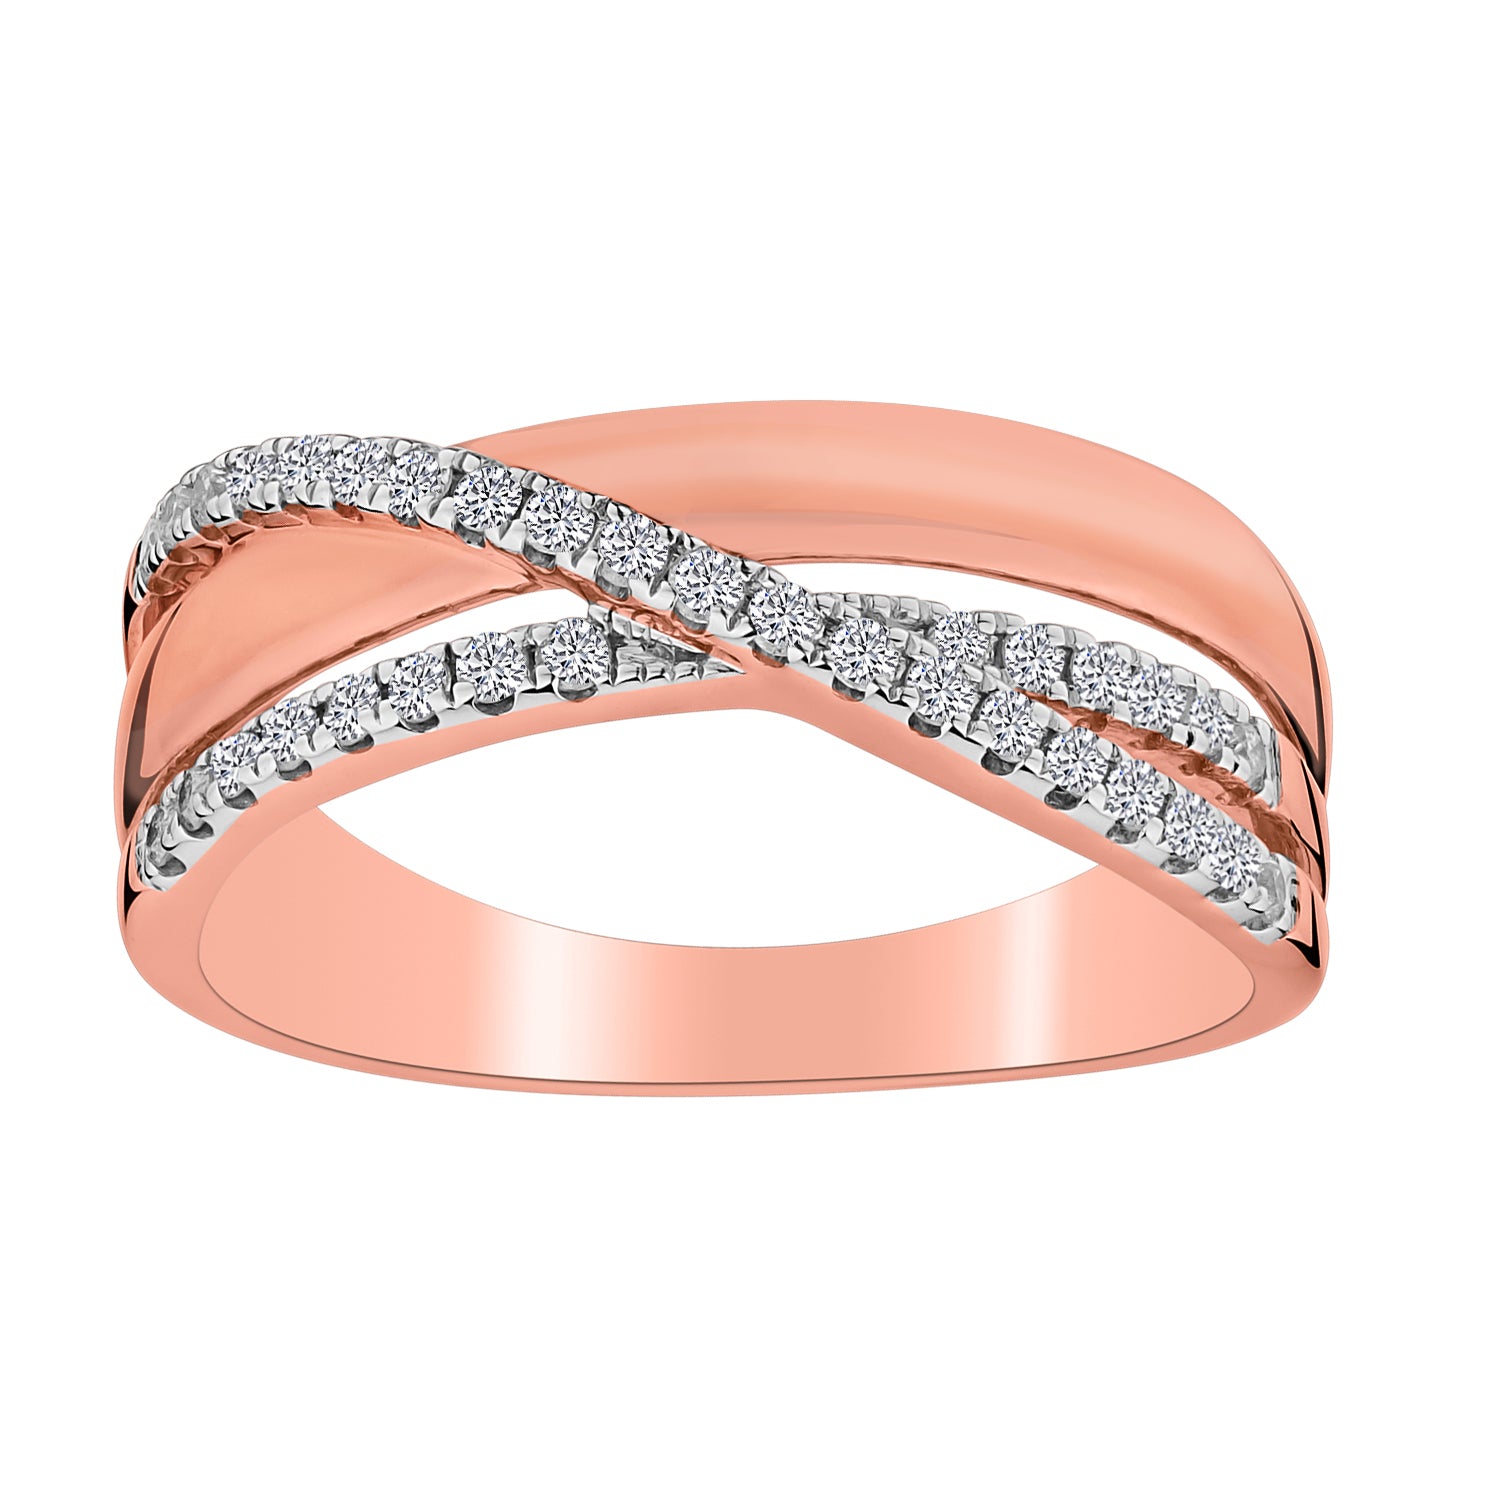 .30 CARAT DIAMOND RING, 10kt ROSE GOLD. Fashion Rings - Griffin Jewellery Designs